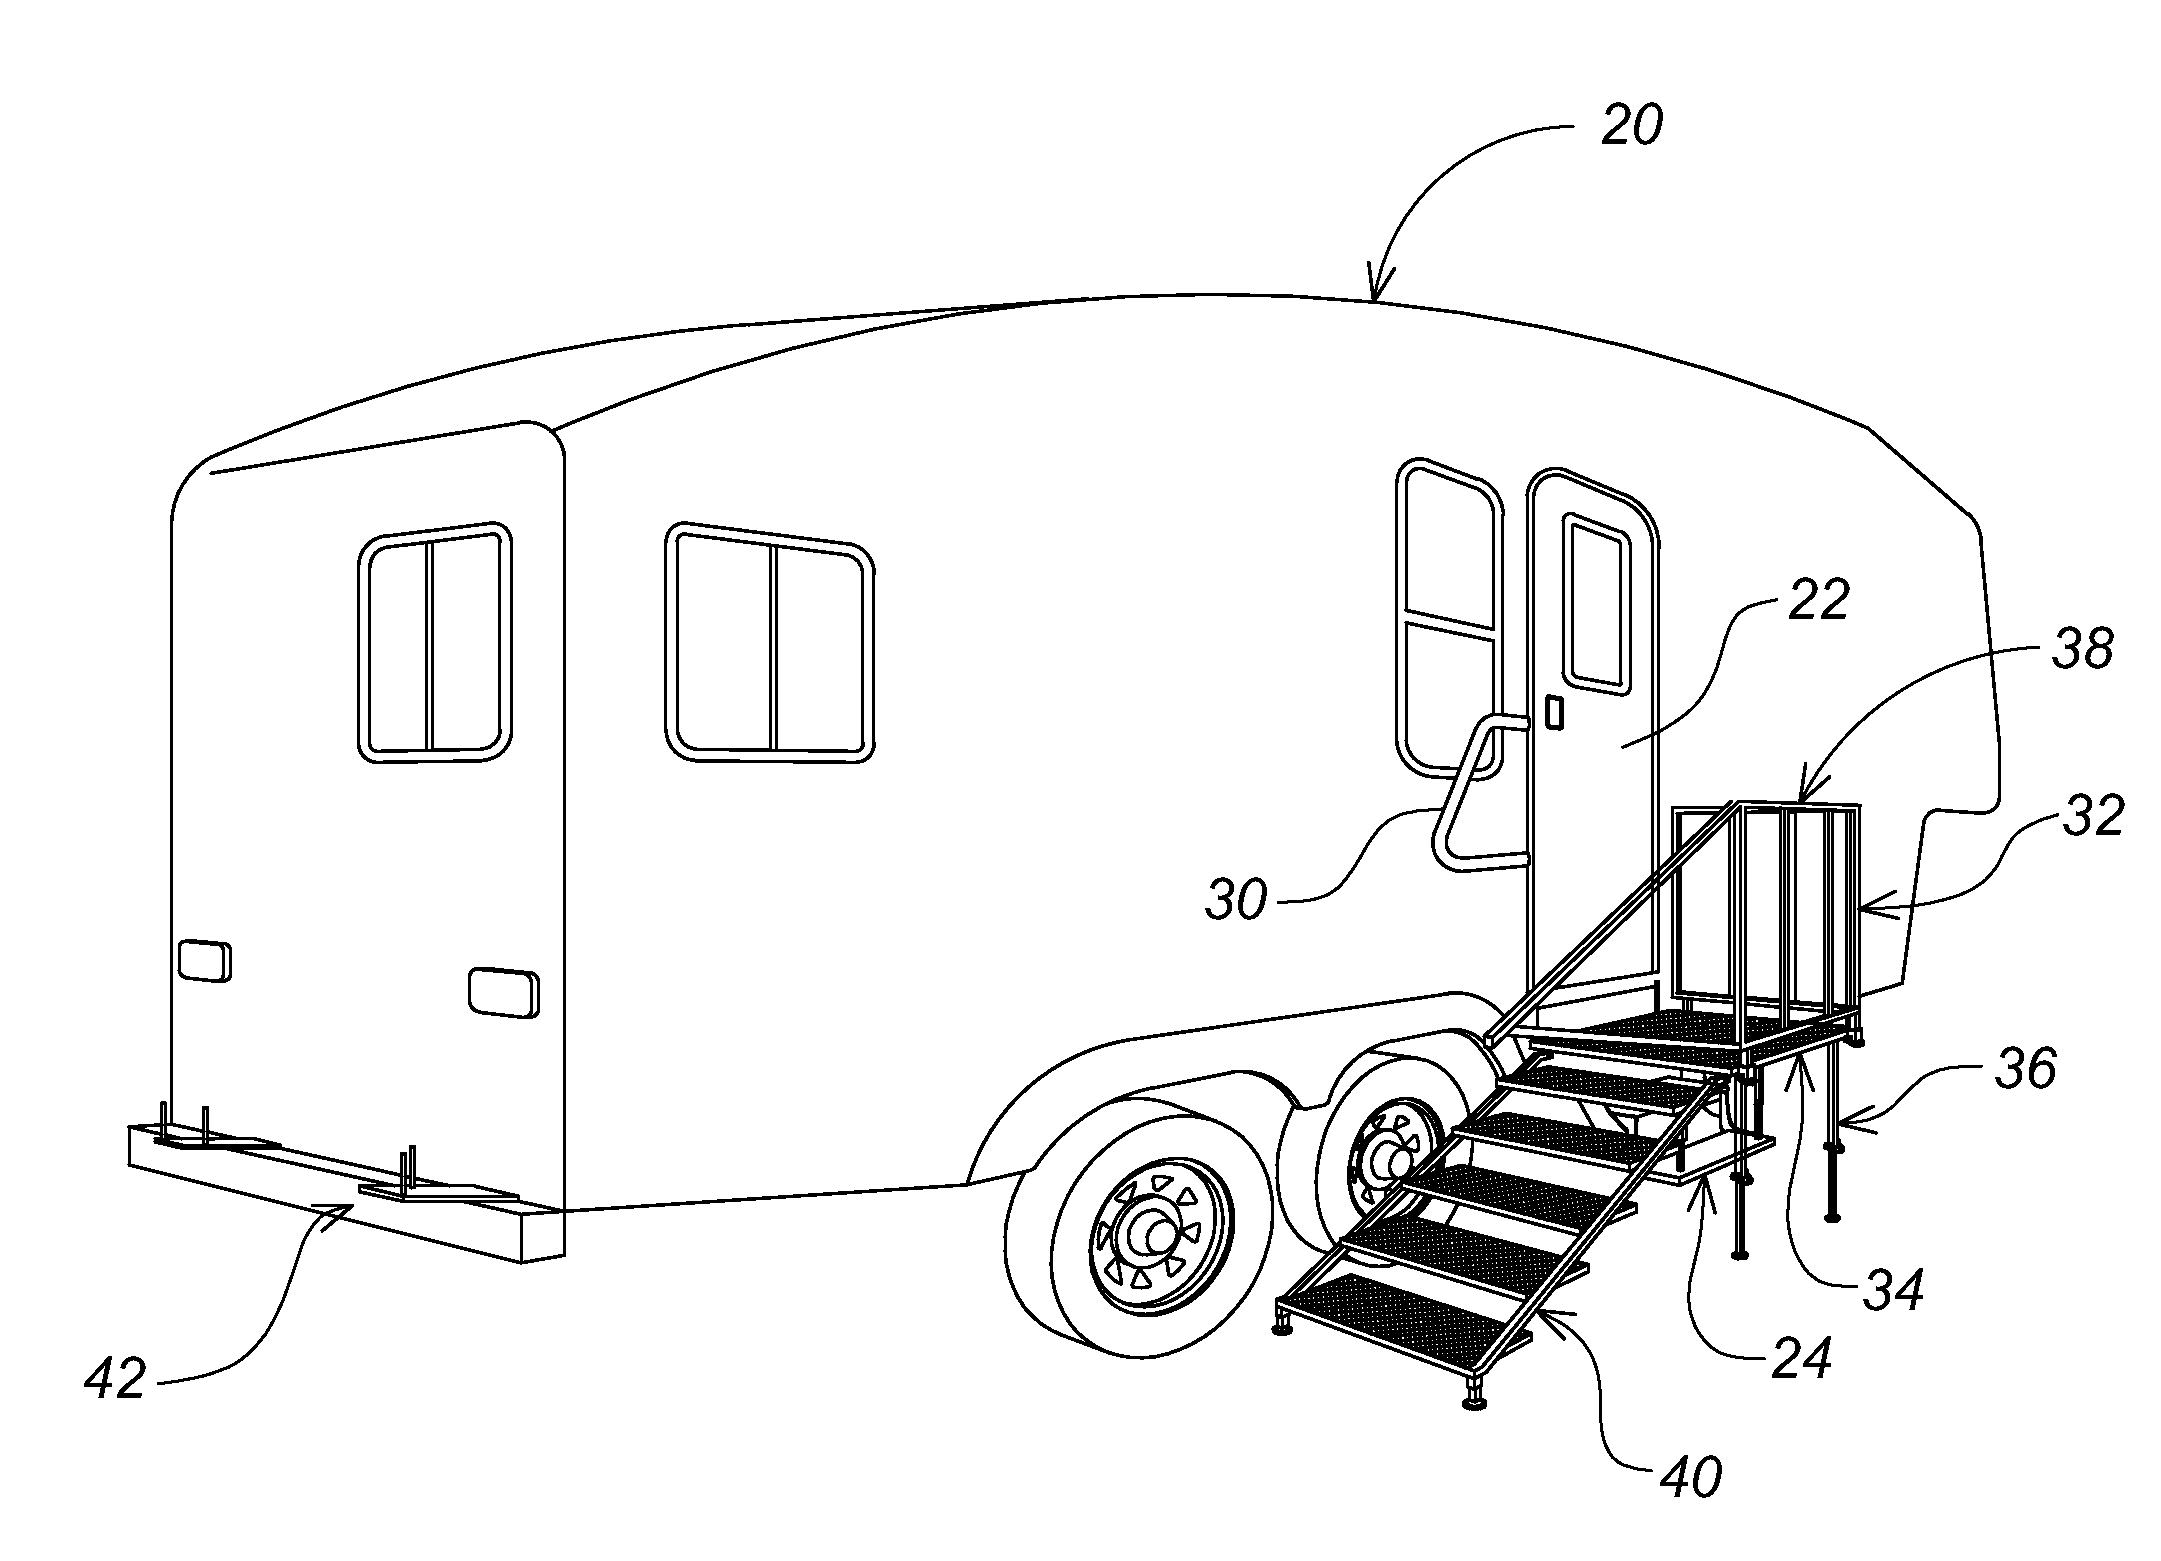 Portable porch with integral stairs